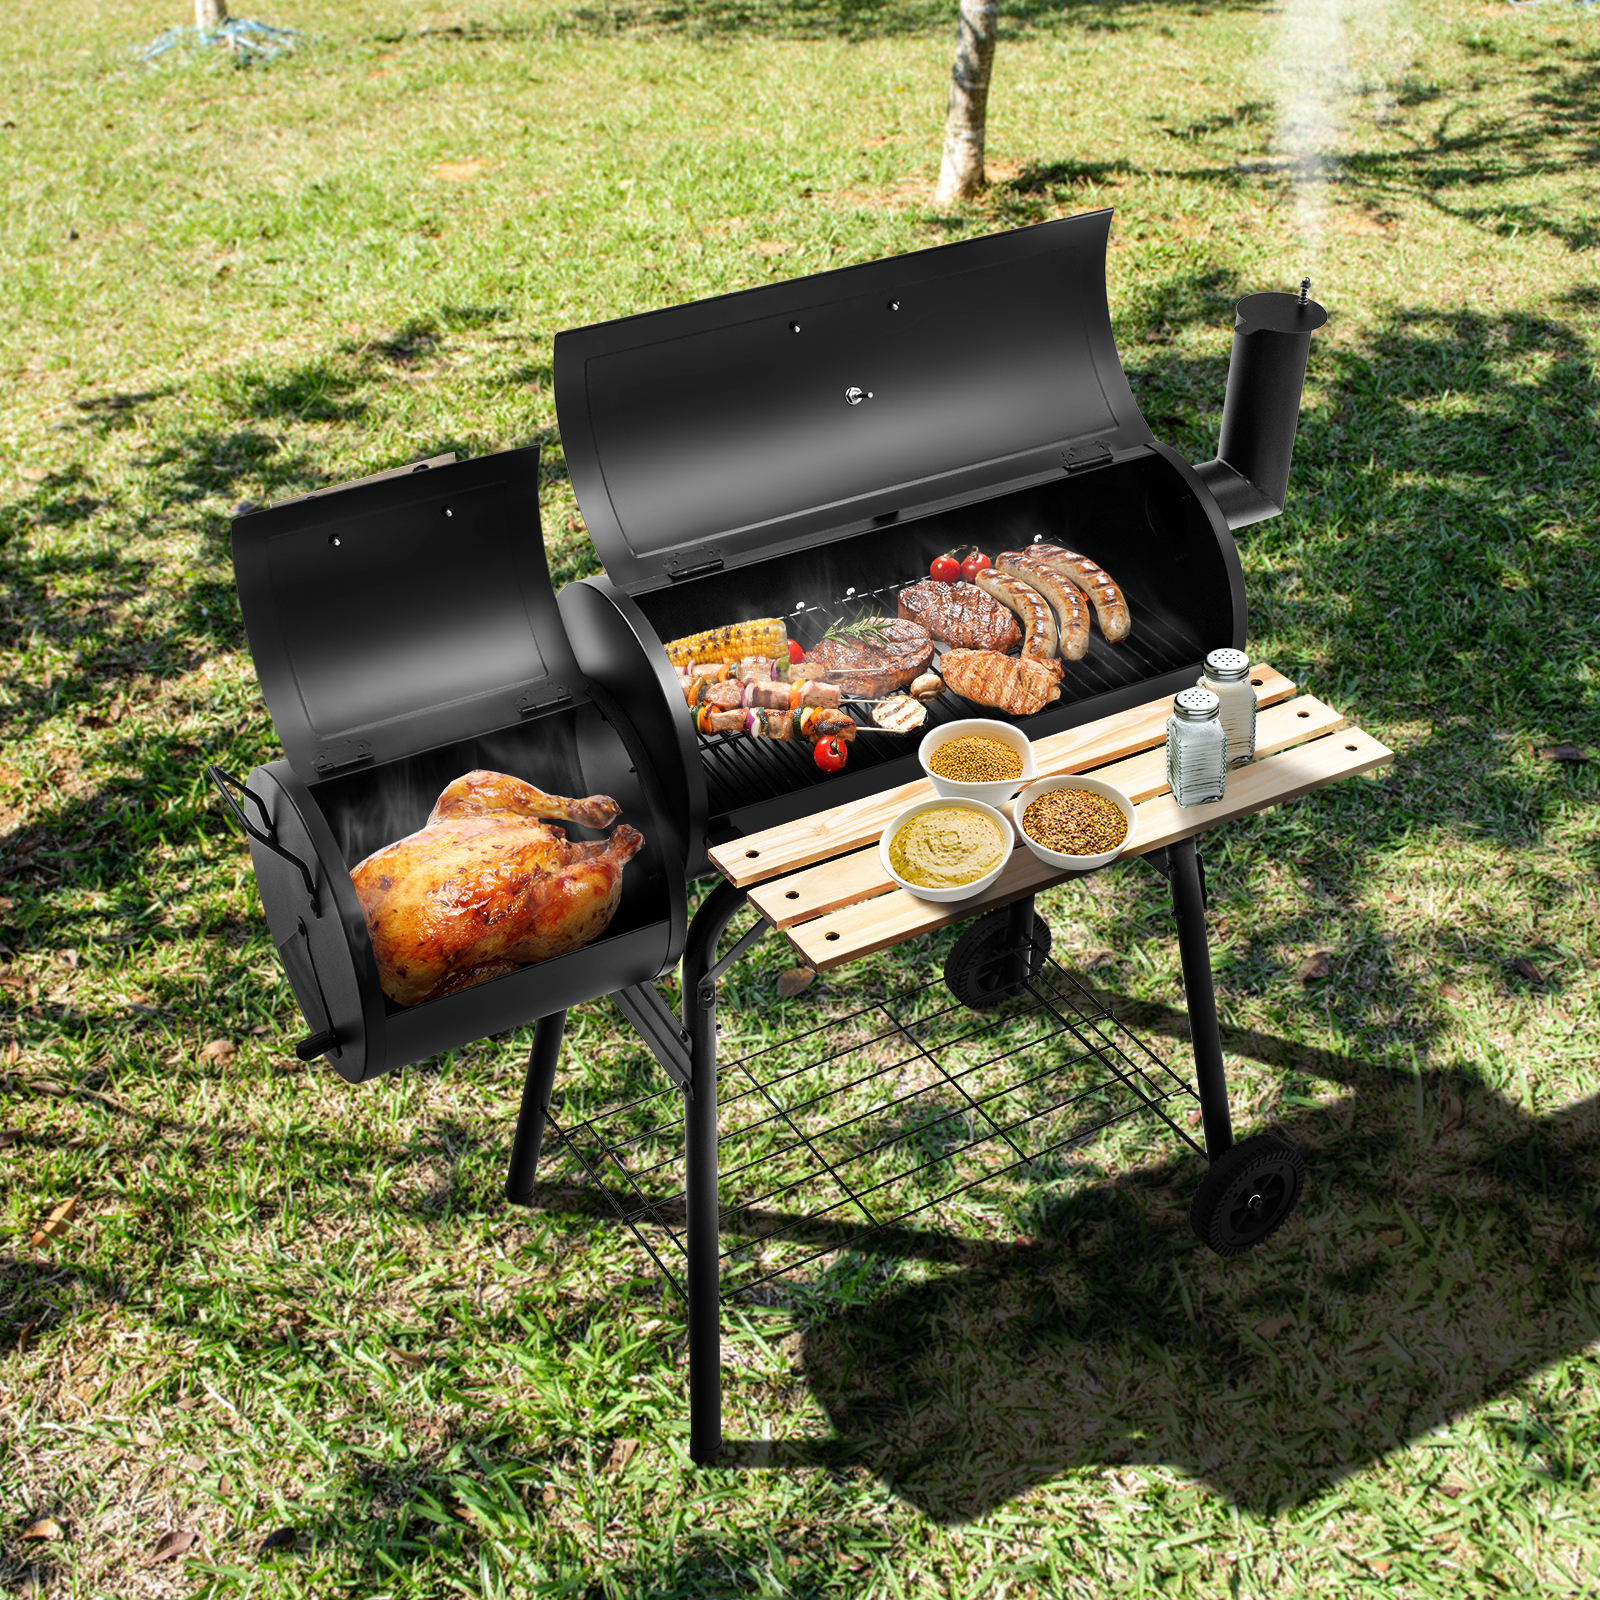 Topbuy BBQ Grill Charcoal Barbecue Meat Smoker Backyard Camping - image 3 of 10